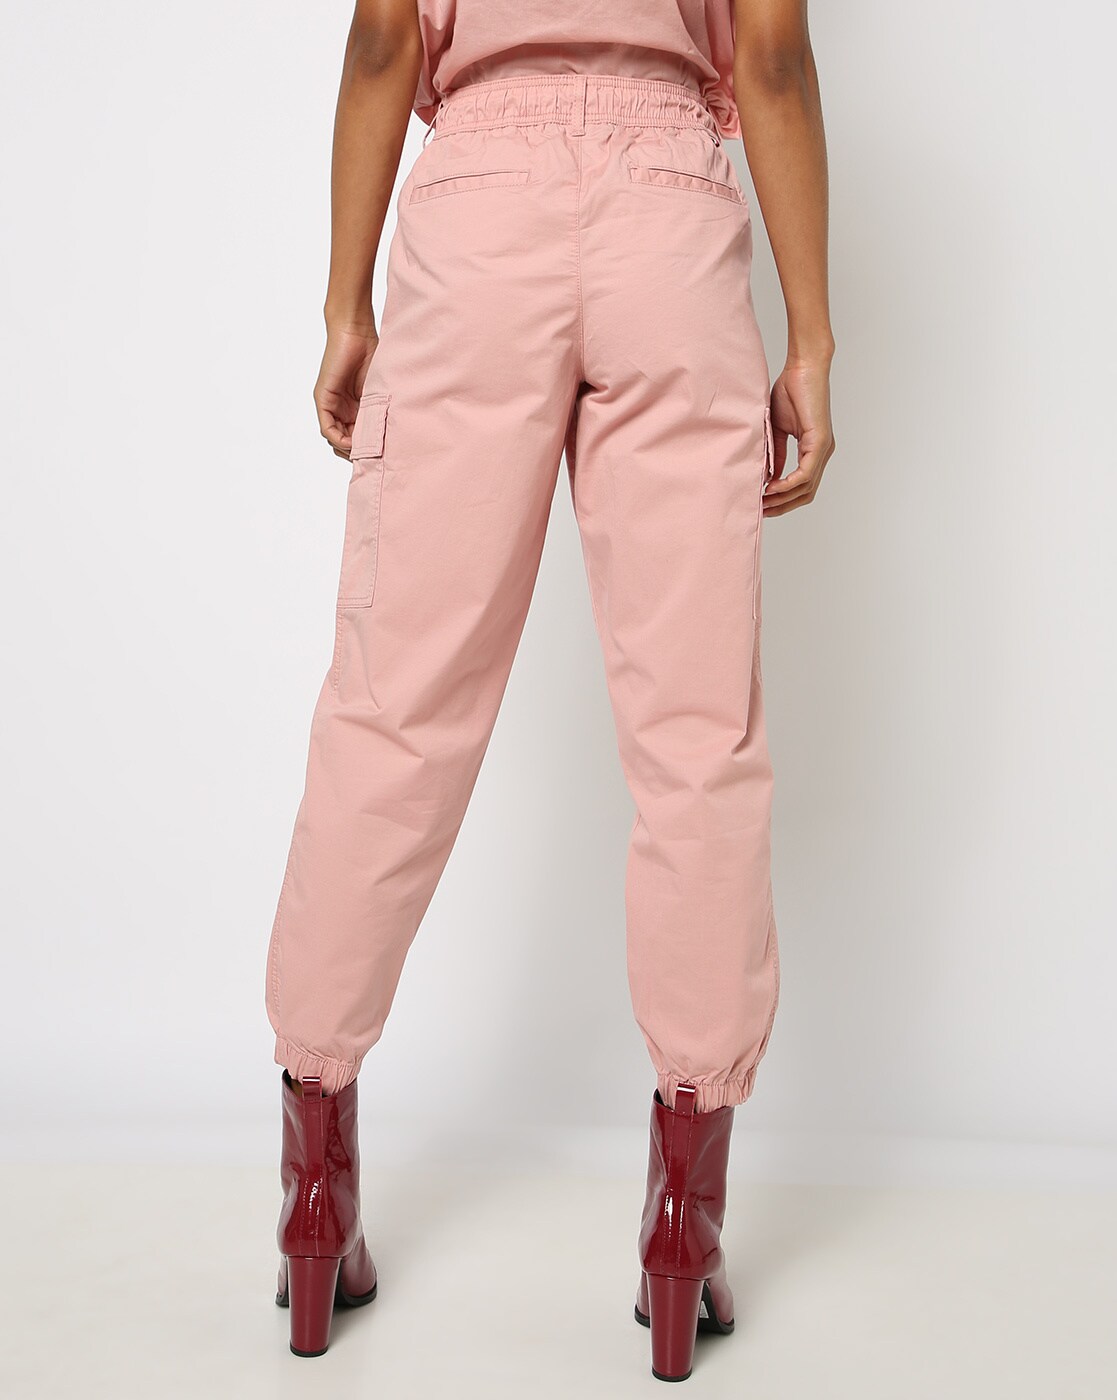 Buy Pink Trousers  Pants for Women by ORCHID BLUES Online  Ajiocom